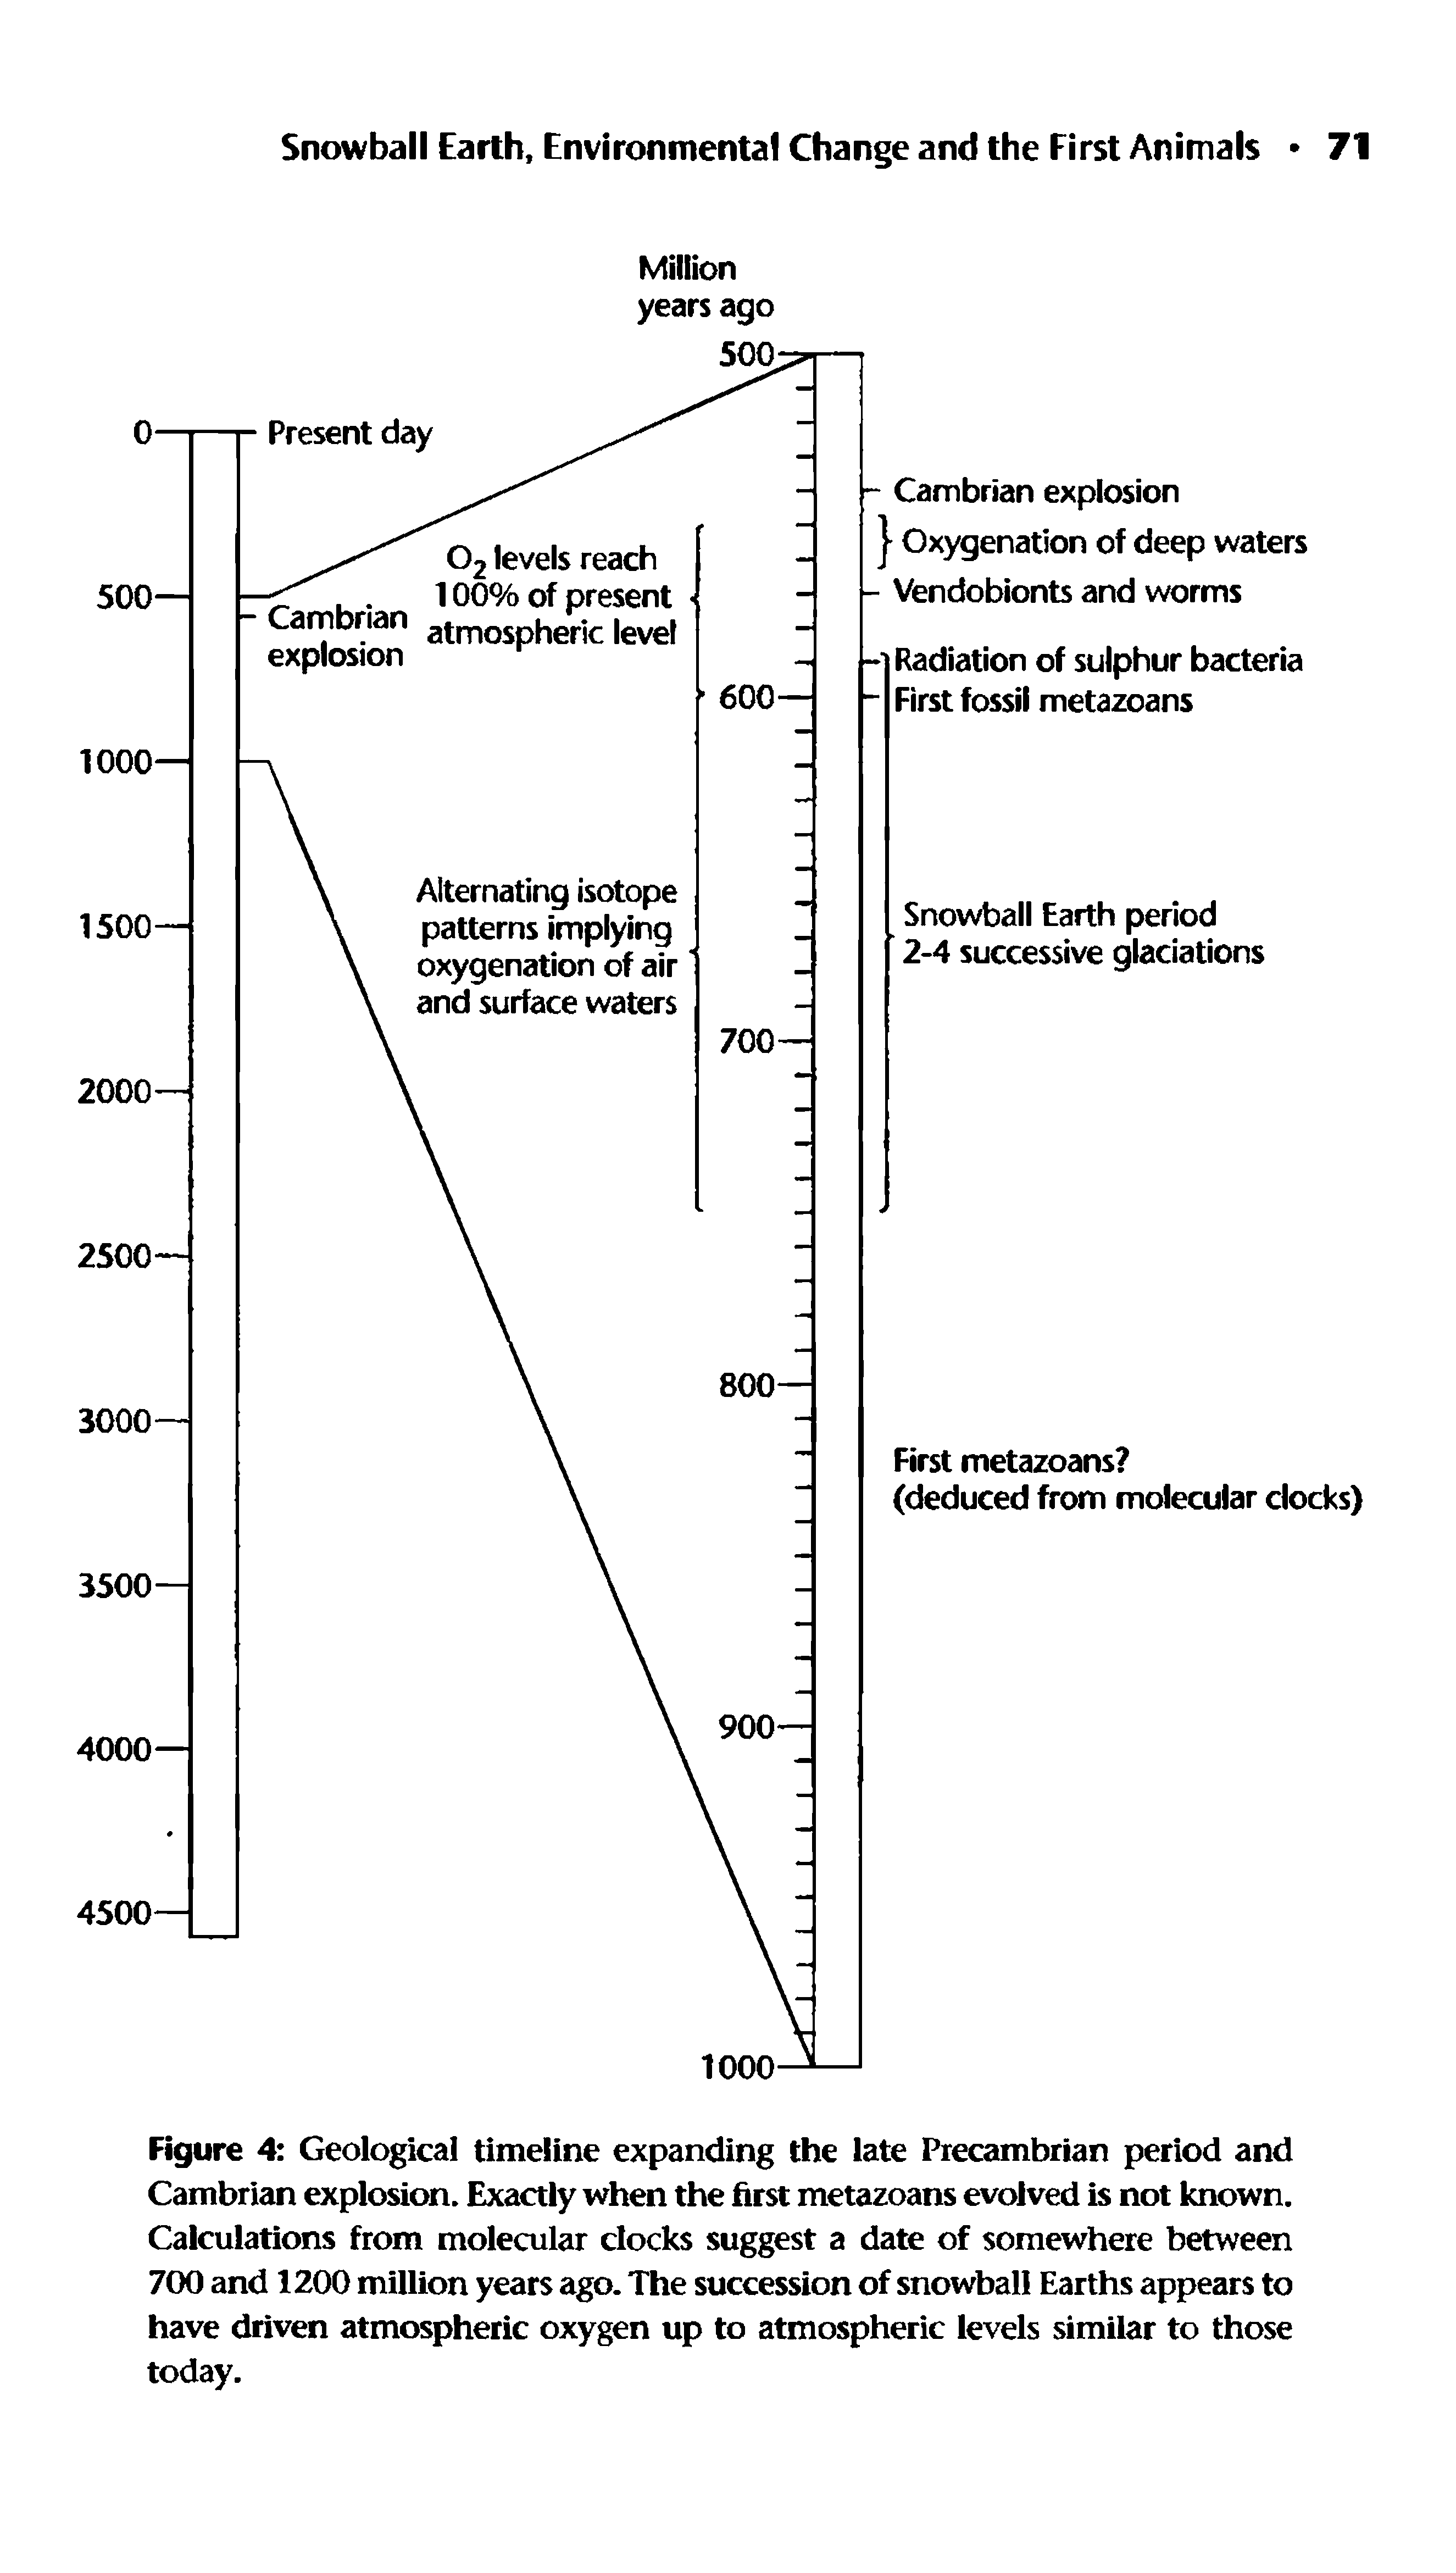 Figure 4 Geological timeline expanding the late Precambrian period and Cambrian explosion. Exactly when the first metazoans evolved is not known. Calculations from molecular clocks suggest a date of somewhere between 700 and 1200 million years ago. The succession of snowball Earths appears to have driven atmospheric oxygen up to atmospheric levels similar to those today.